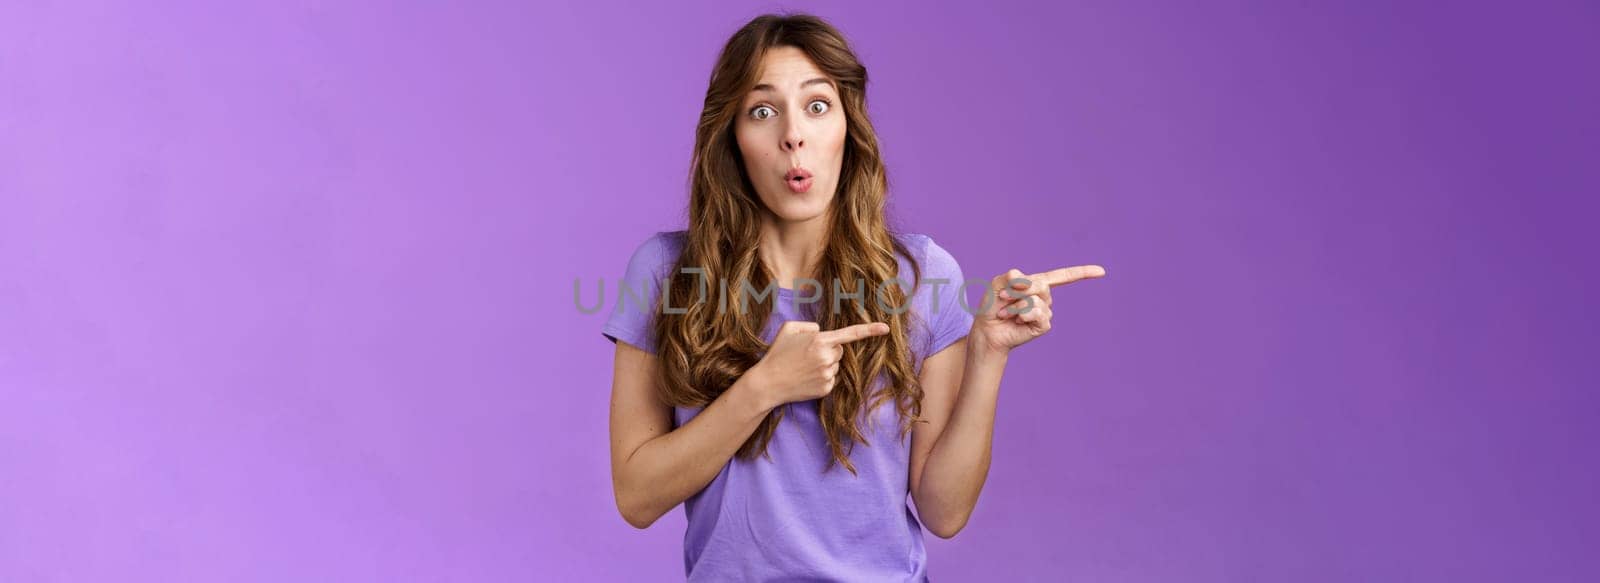 Amused surprised enthusiastic cute girlfriend wanna try advertising product folding lips excited look admiration excitement stand purple background curious interested what located direction.